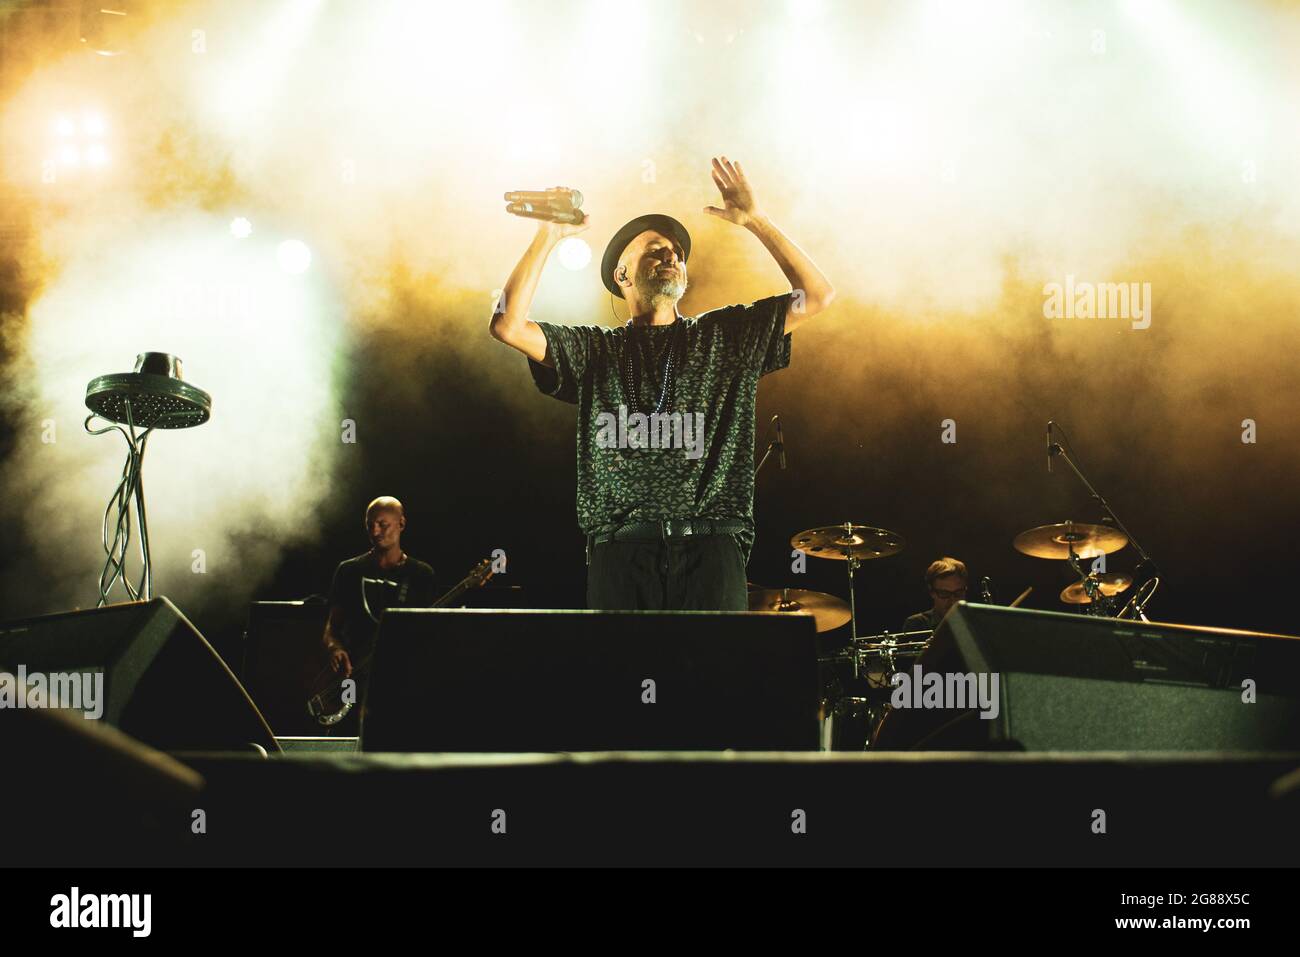 Collegno, Italy. 17th July, 2021. FLOWERS FESTIVAL, COLLEGNO, ITALY JULY  17TH: Samuel Romano, singer of the Italian rock/pop band Subsonica,  performing live on stage for the band's first summer 2021 tour concert. (